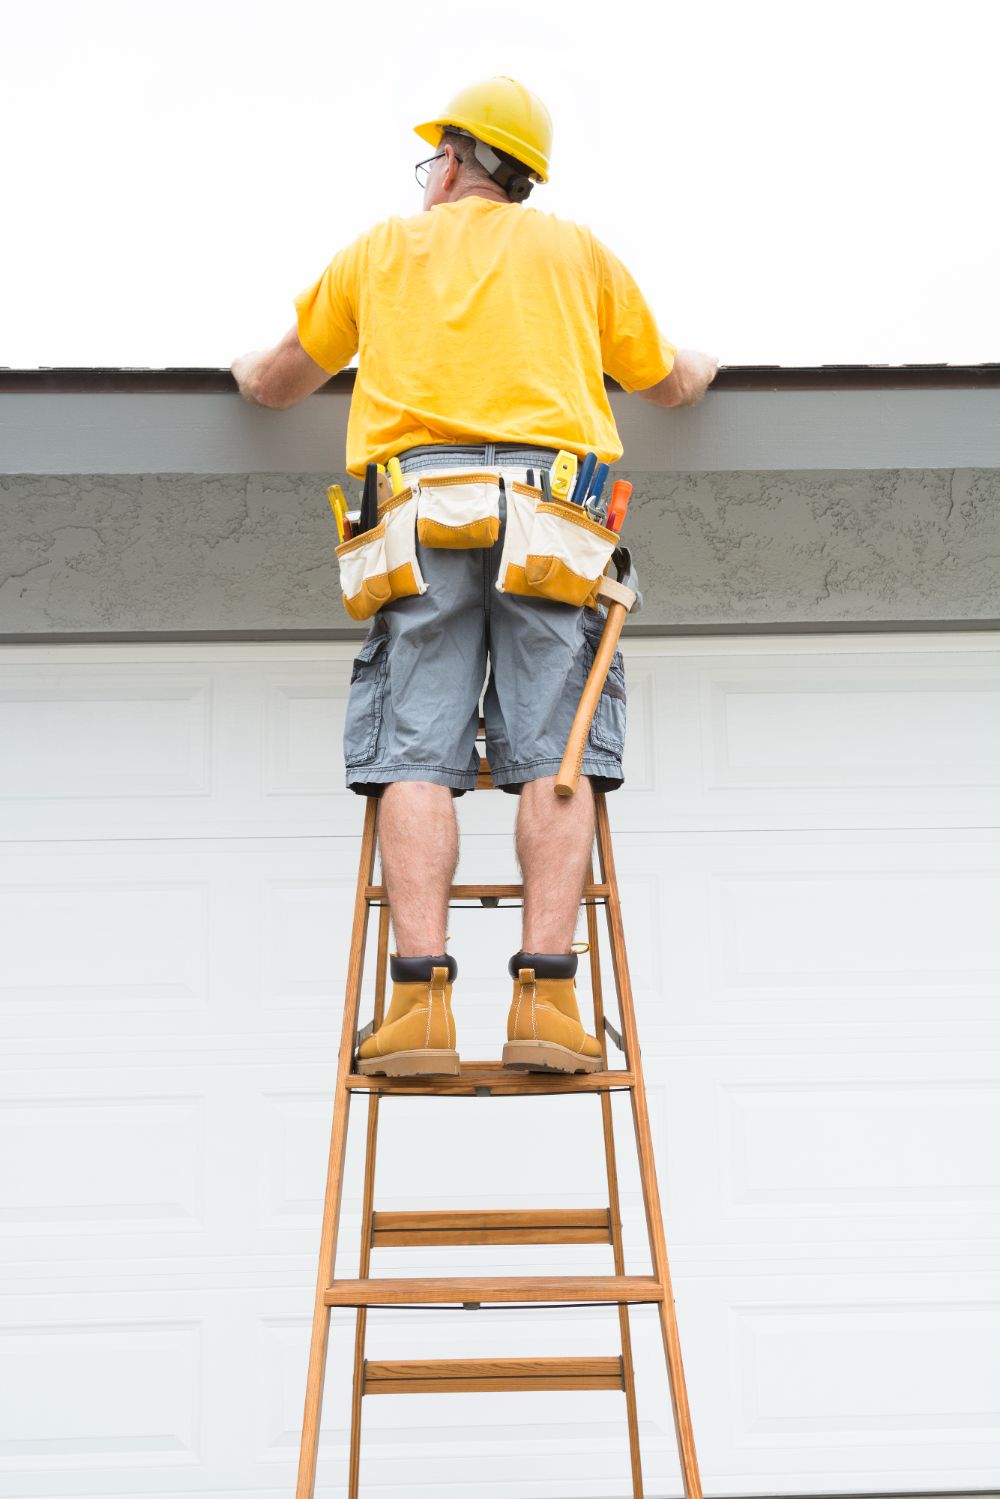 Contractor standing on ladder financially protected by insurance if he were to fall